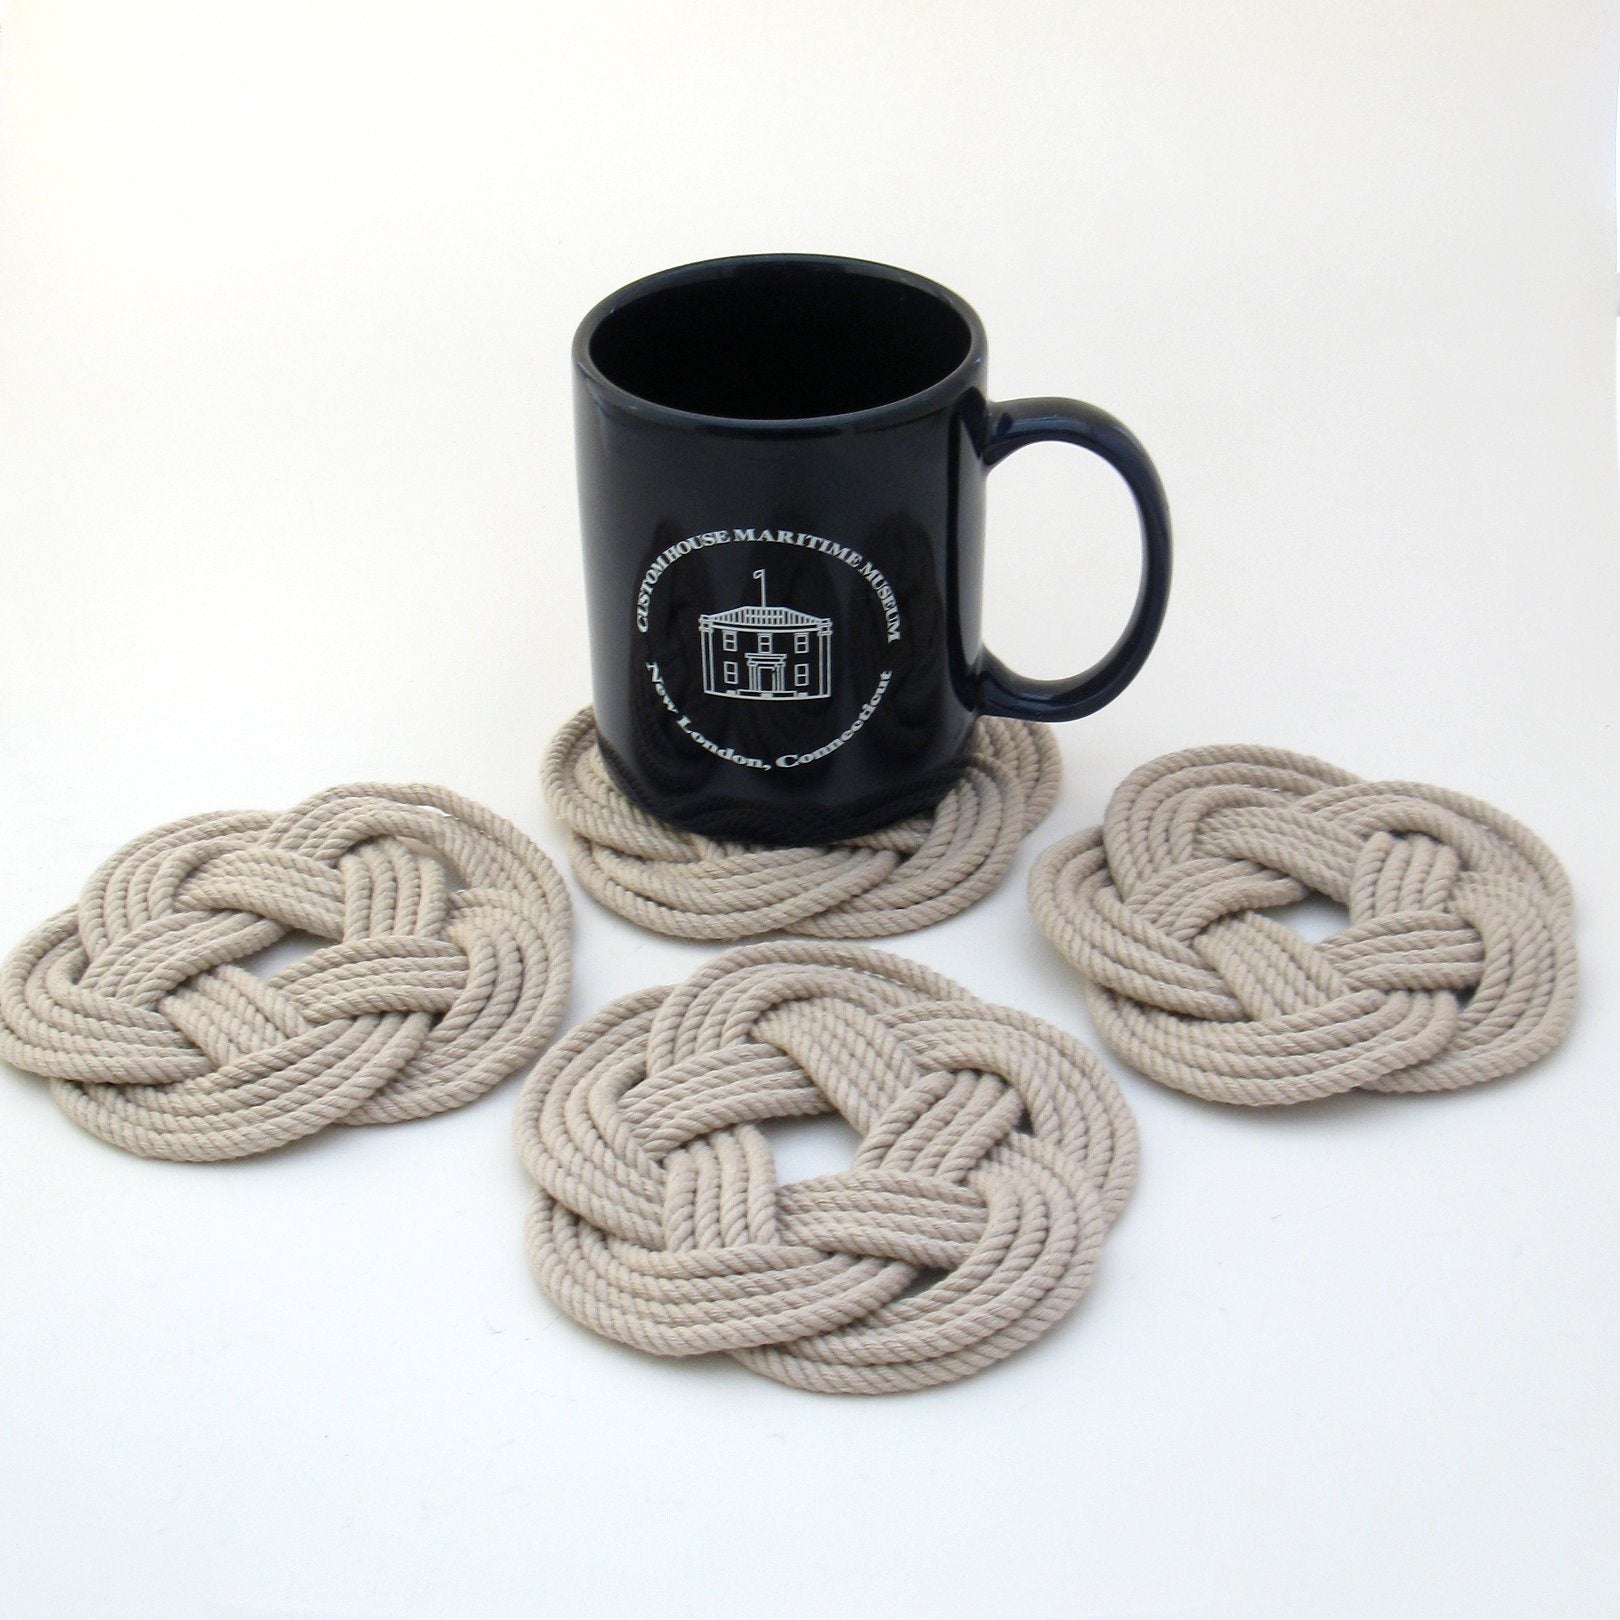 Nautical Knot Sailor Knot Coasters, woven in Tan , Set of 4 handmade at Mystic Knotwork